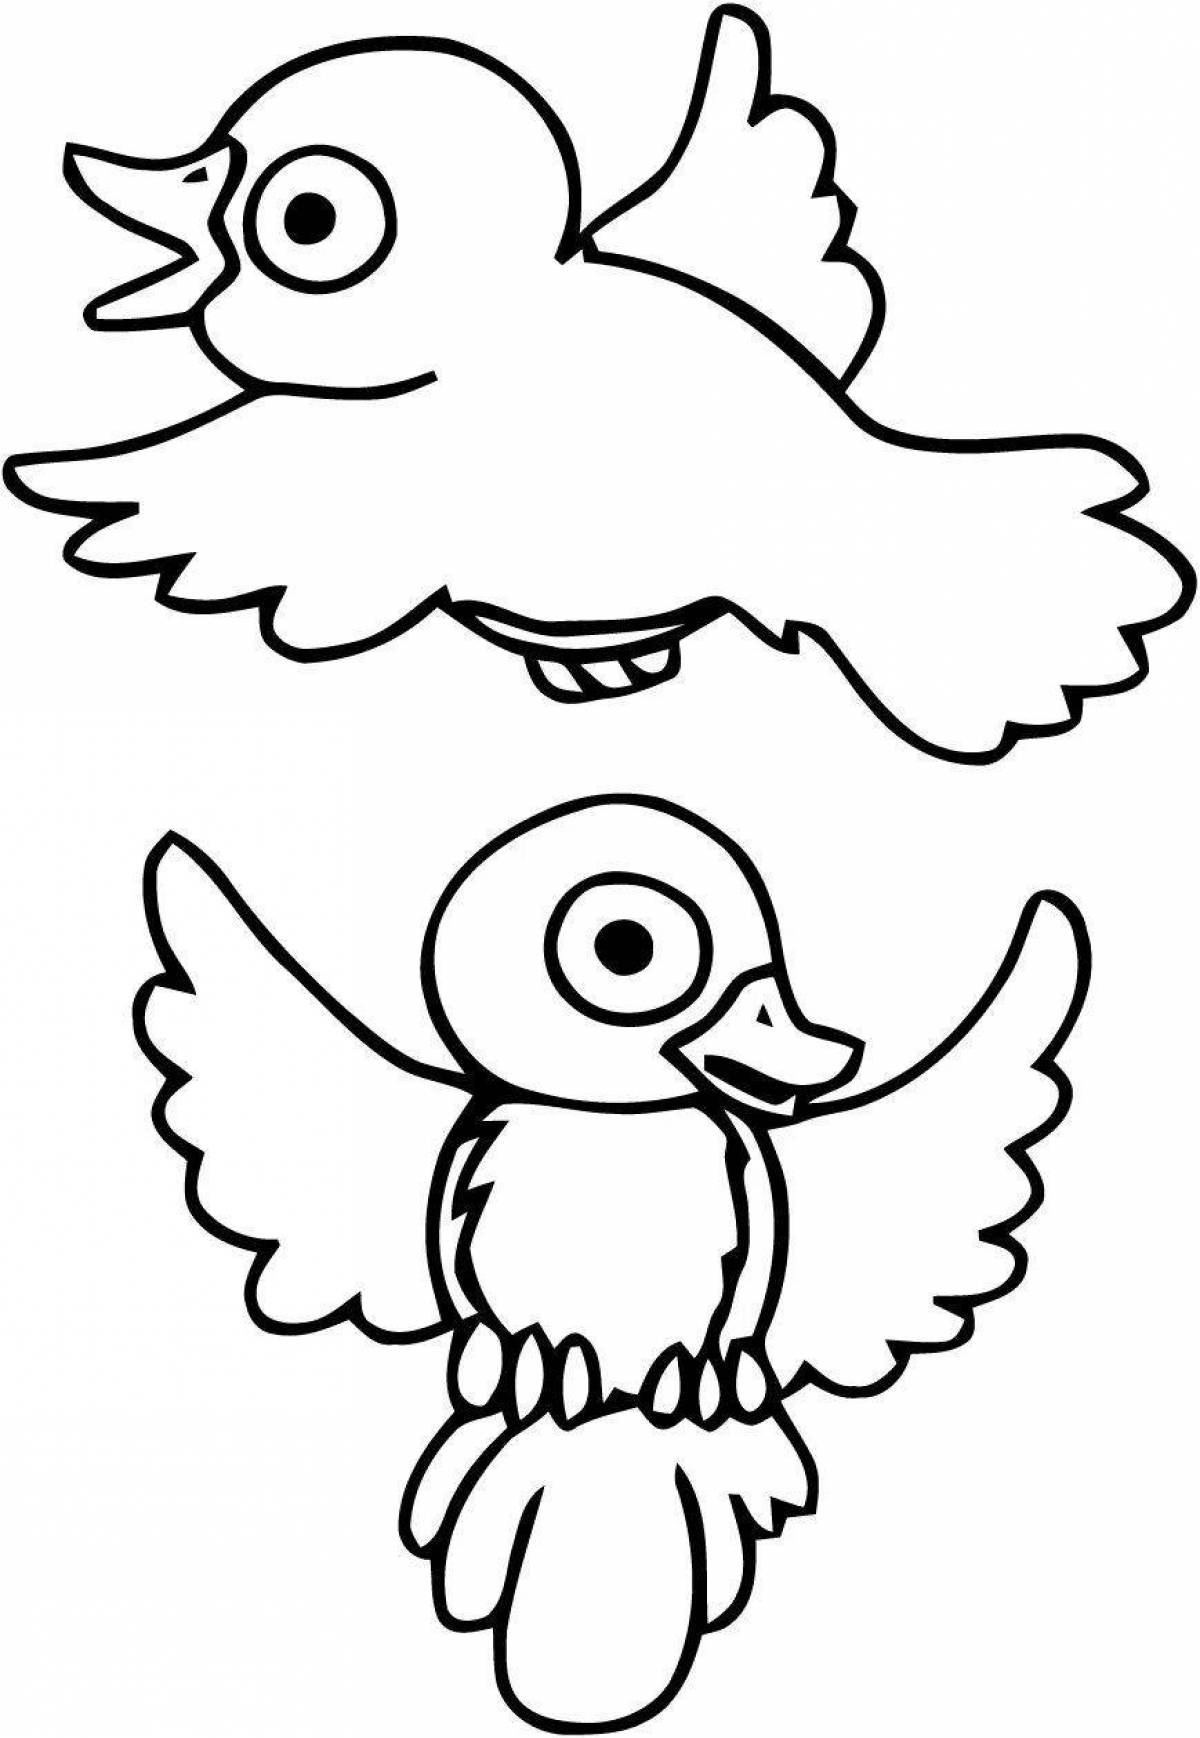 Colorful bird coloring page for kids